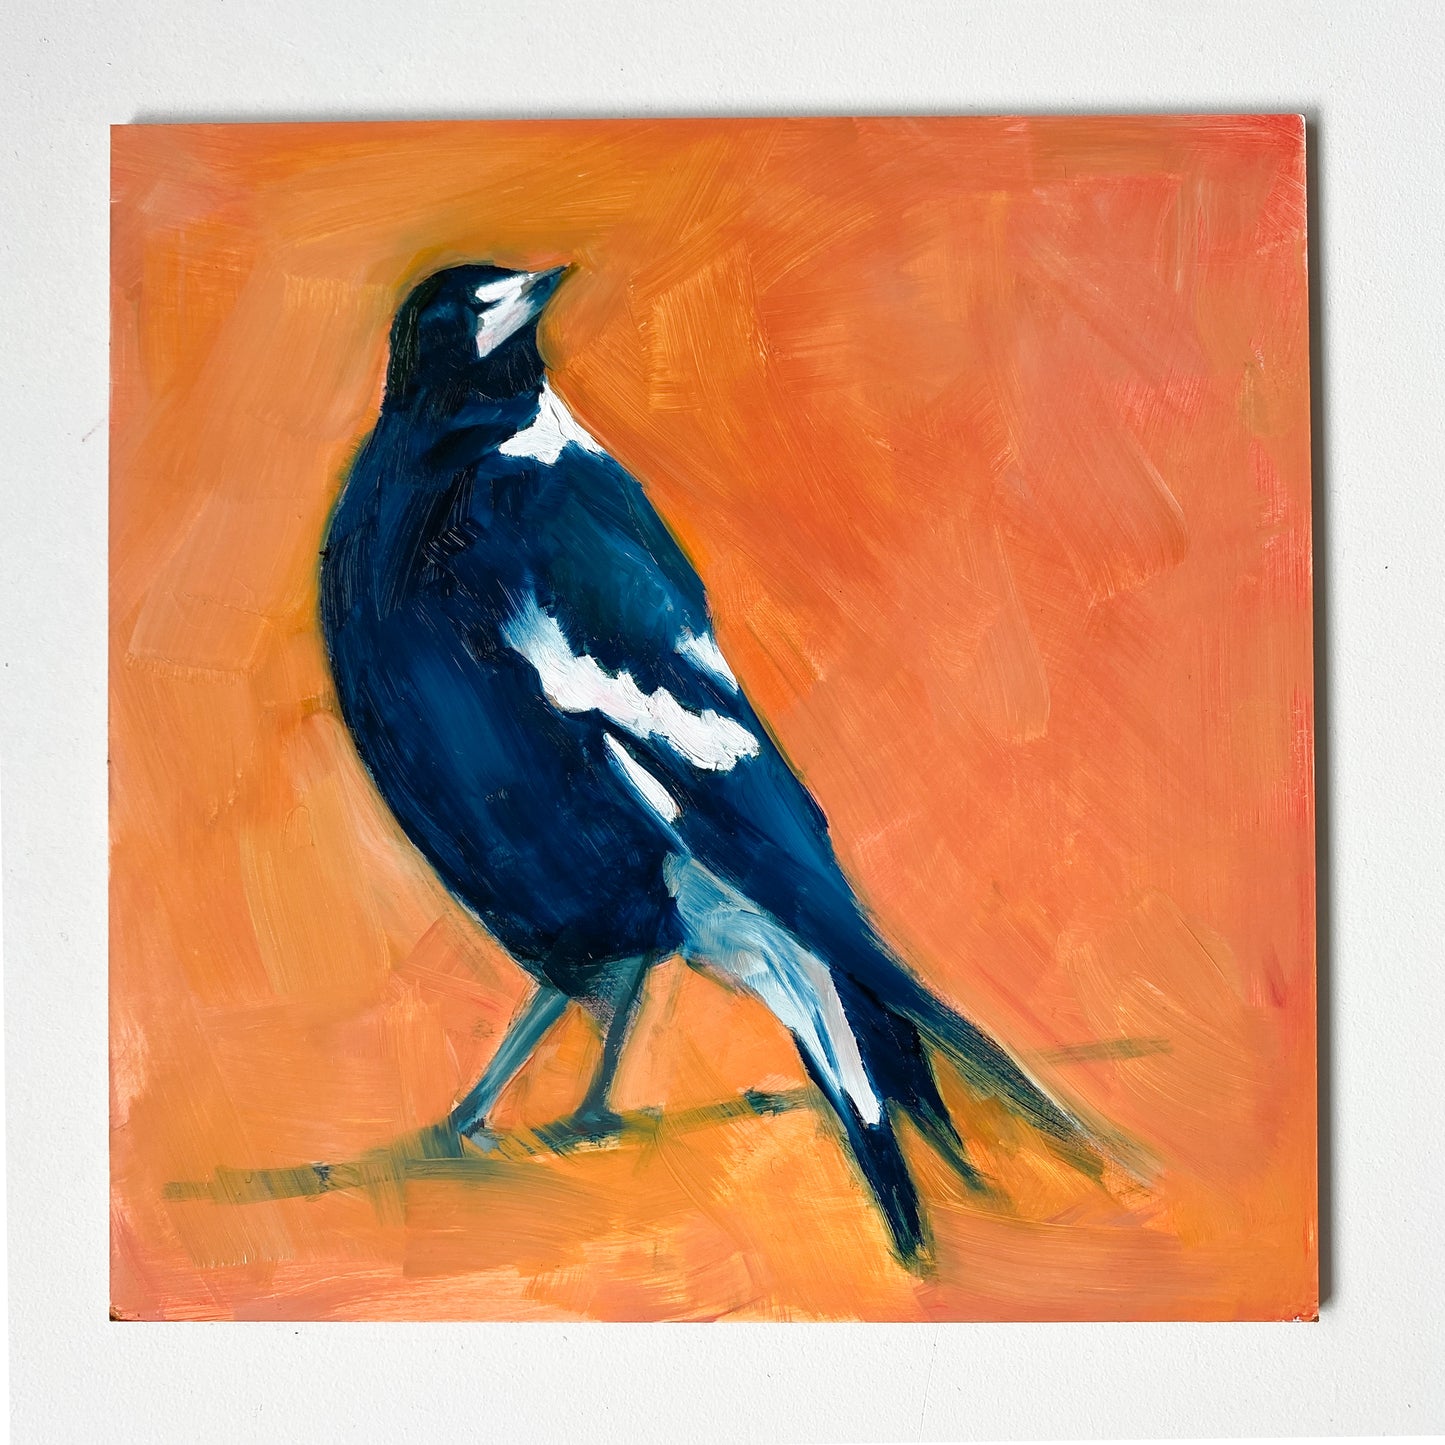 image of an impressionistic oil painting of a navy blue and white magpie looking up on a bright and textured orange background